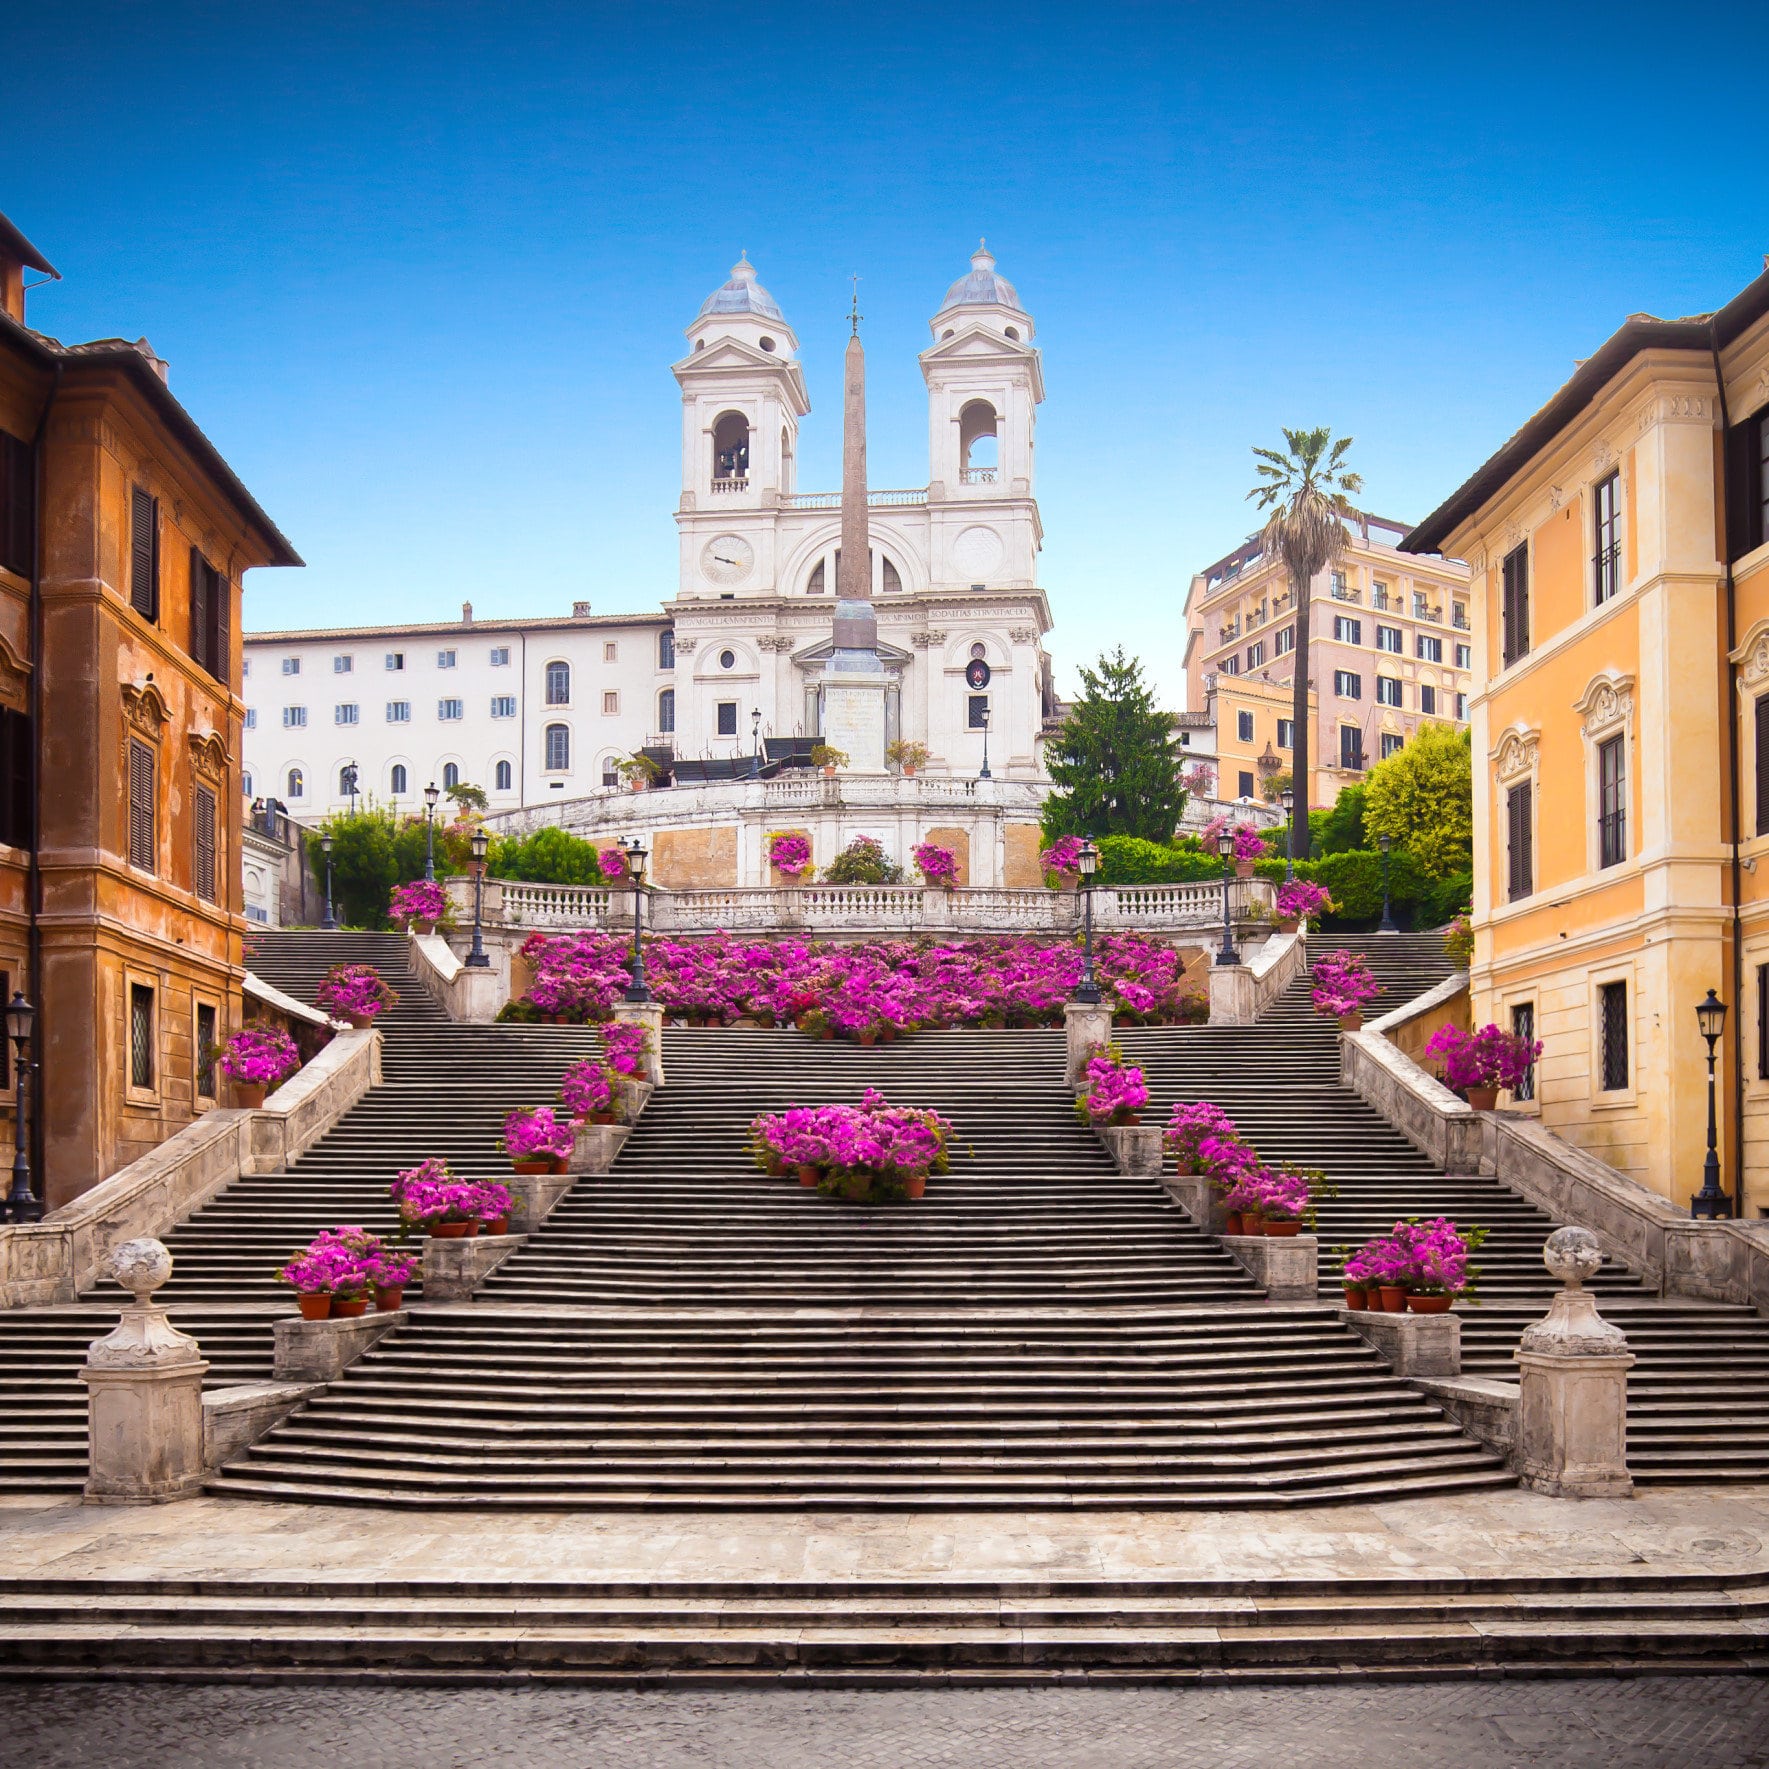 Top 93+ Images what city is home to the spanish steps? Completed